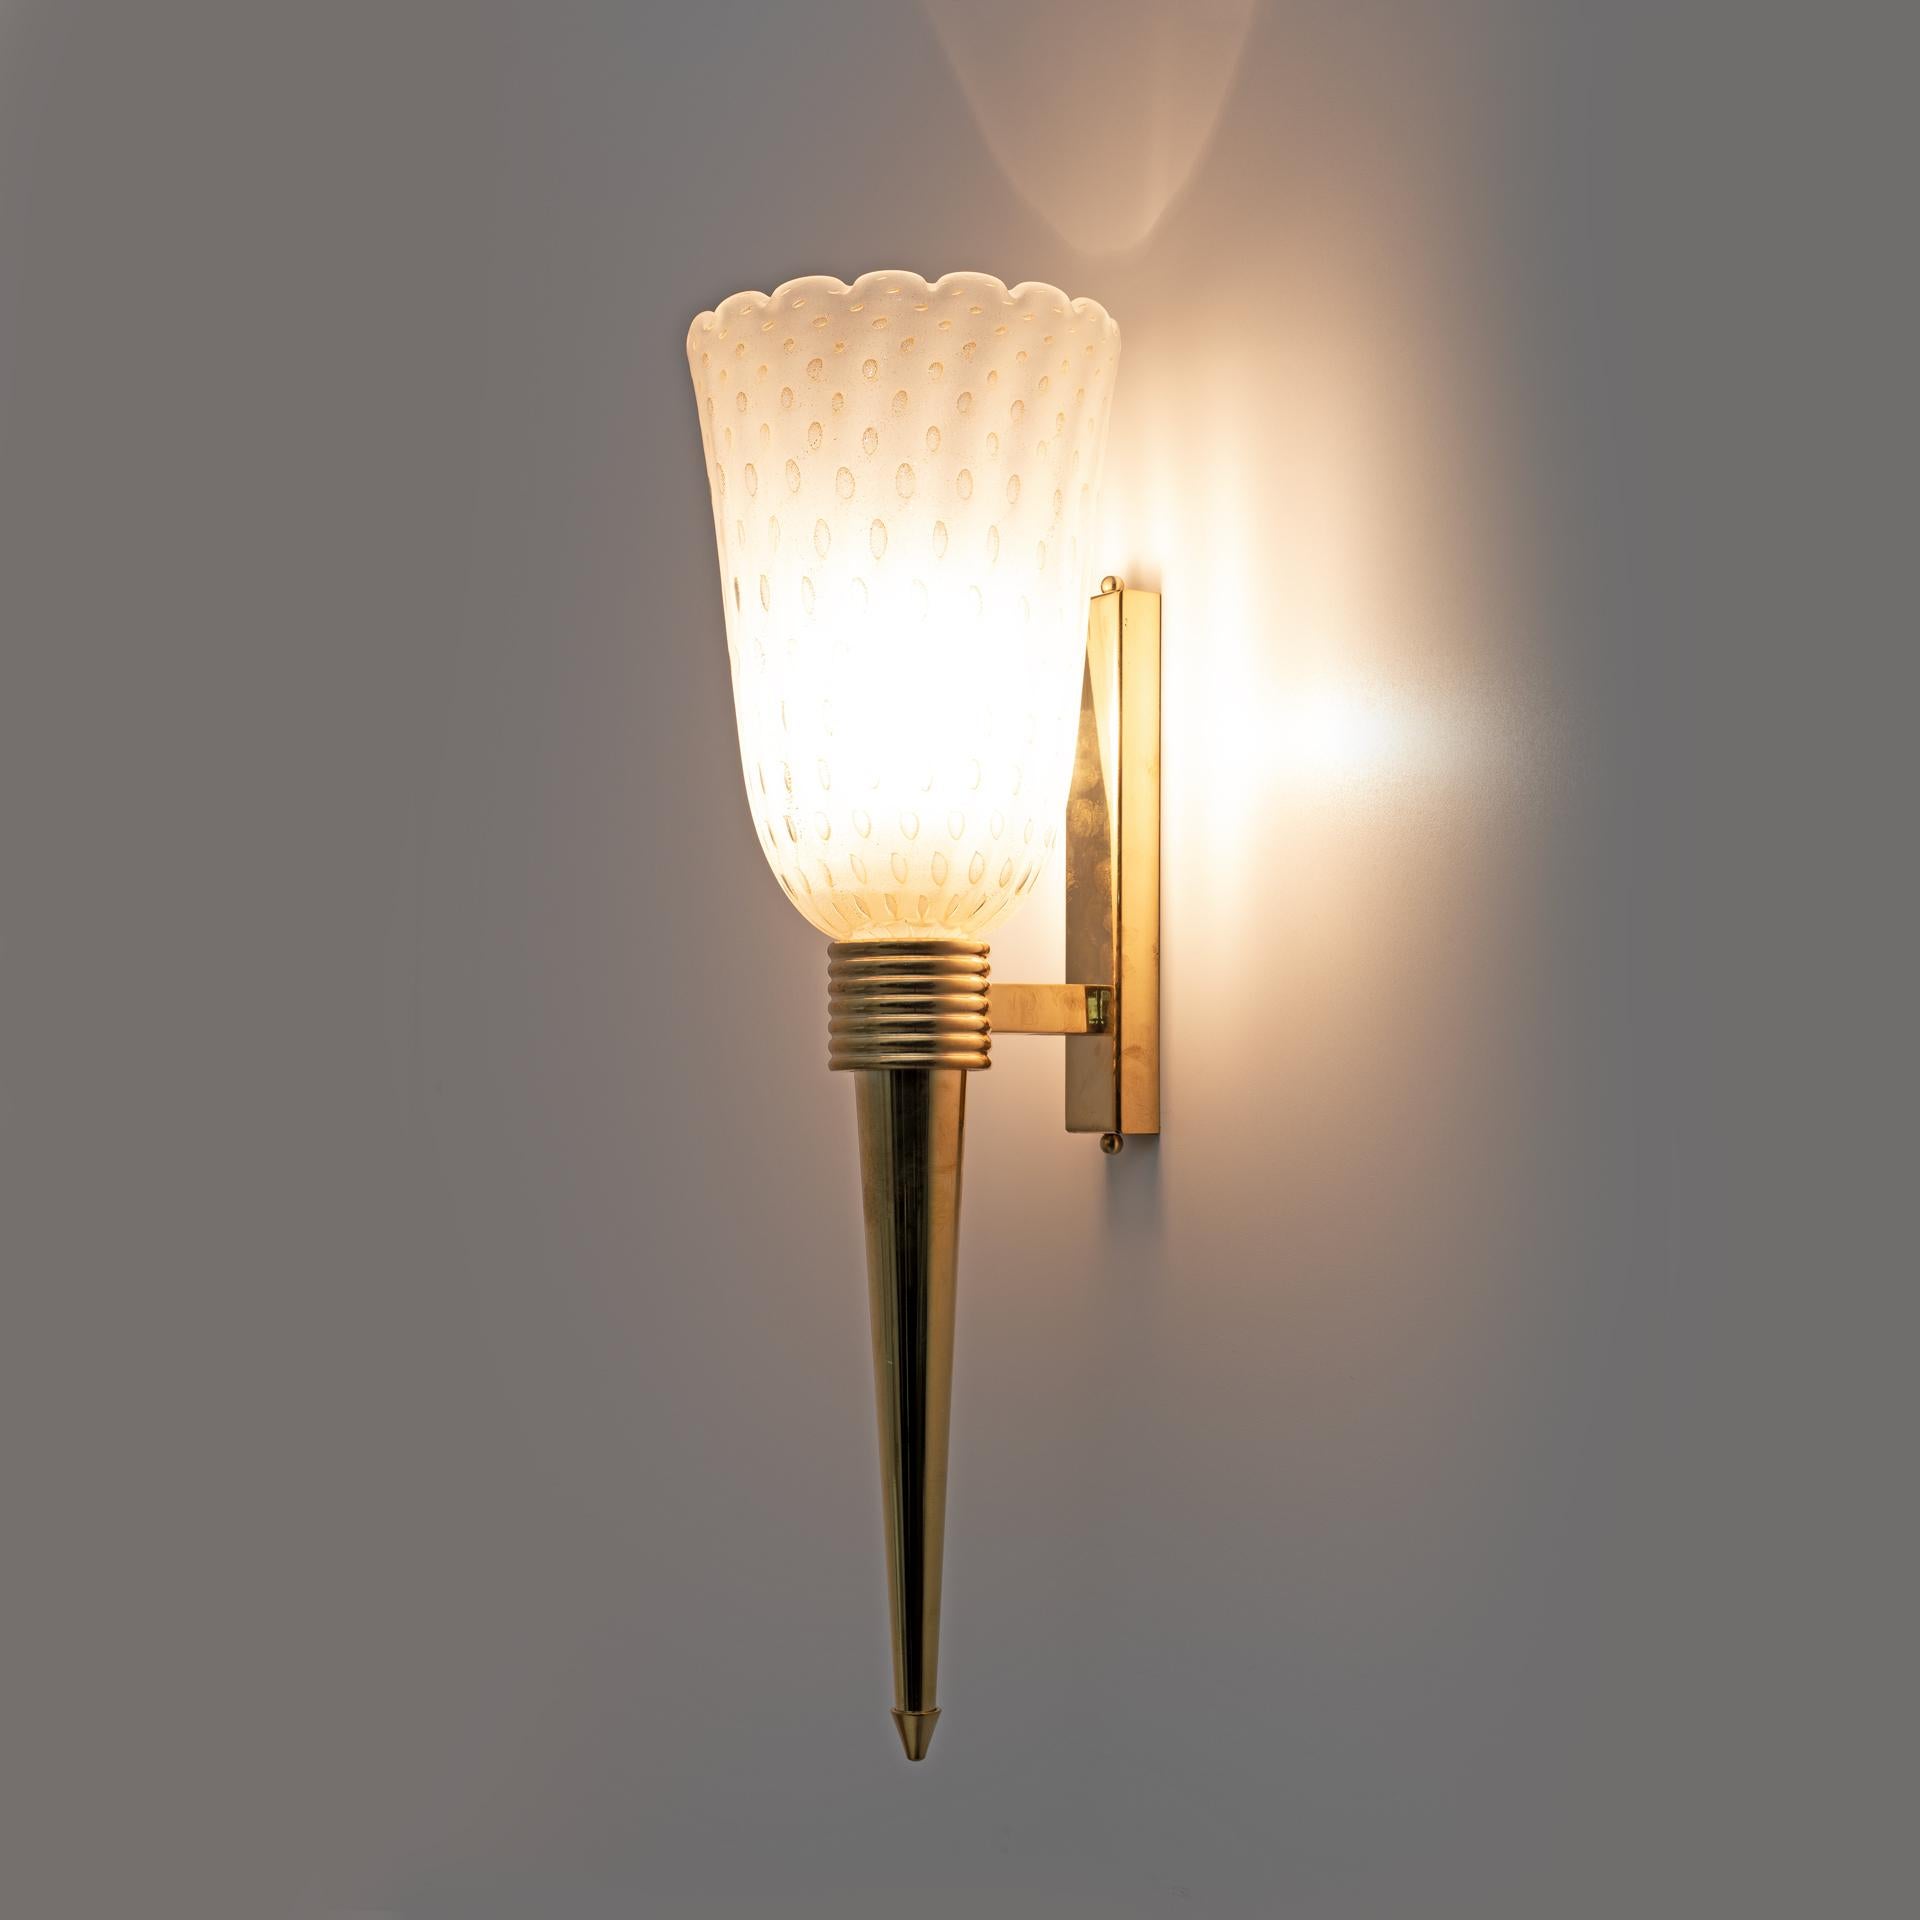 This fabulous pair of Art Deco style Murano glass sconces was made entirely by hand. Everything is decorated with the Pulegoso technique. This means it has large air bubbles inside the high-quality blown glass, made with 24-karat gold dust